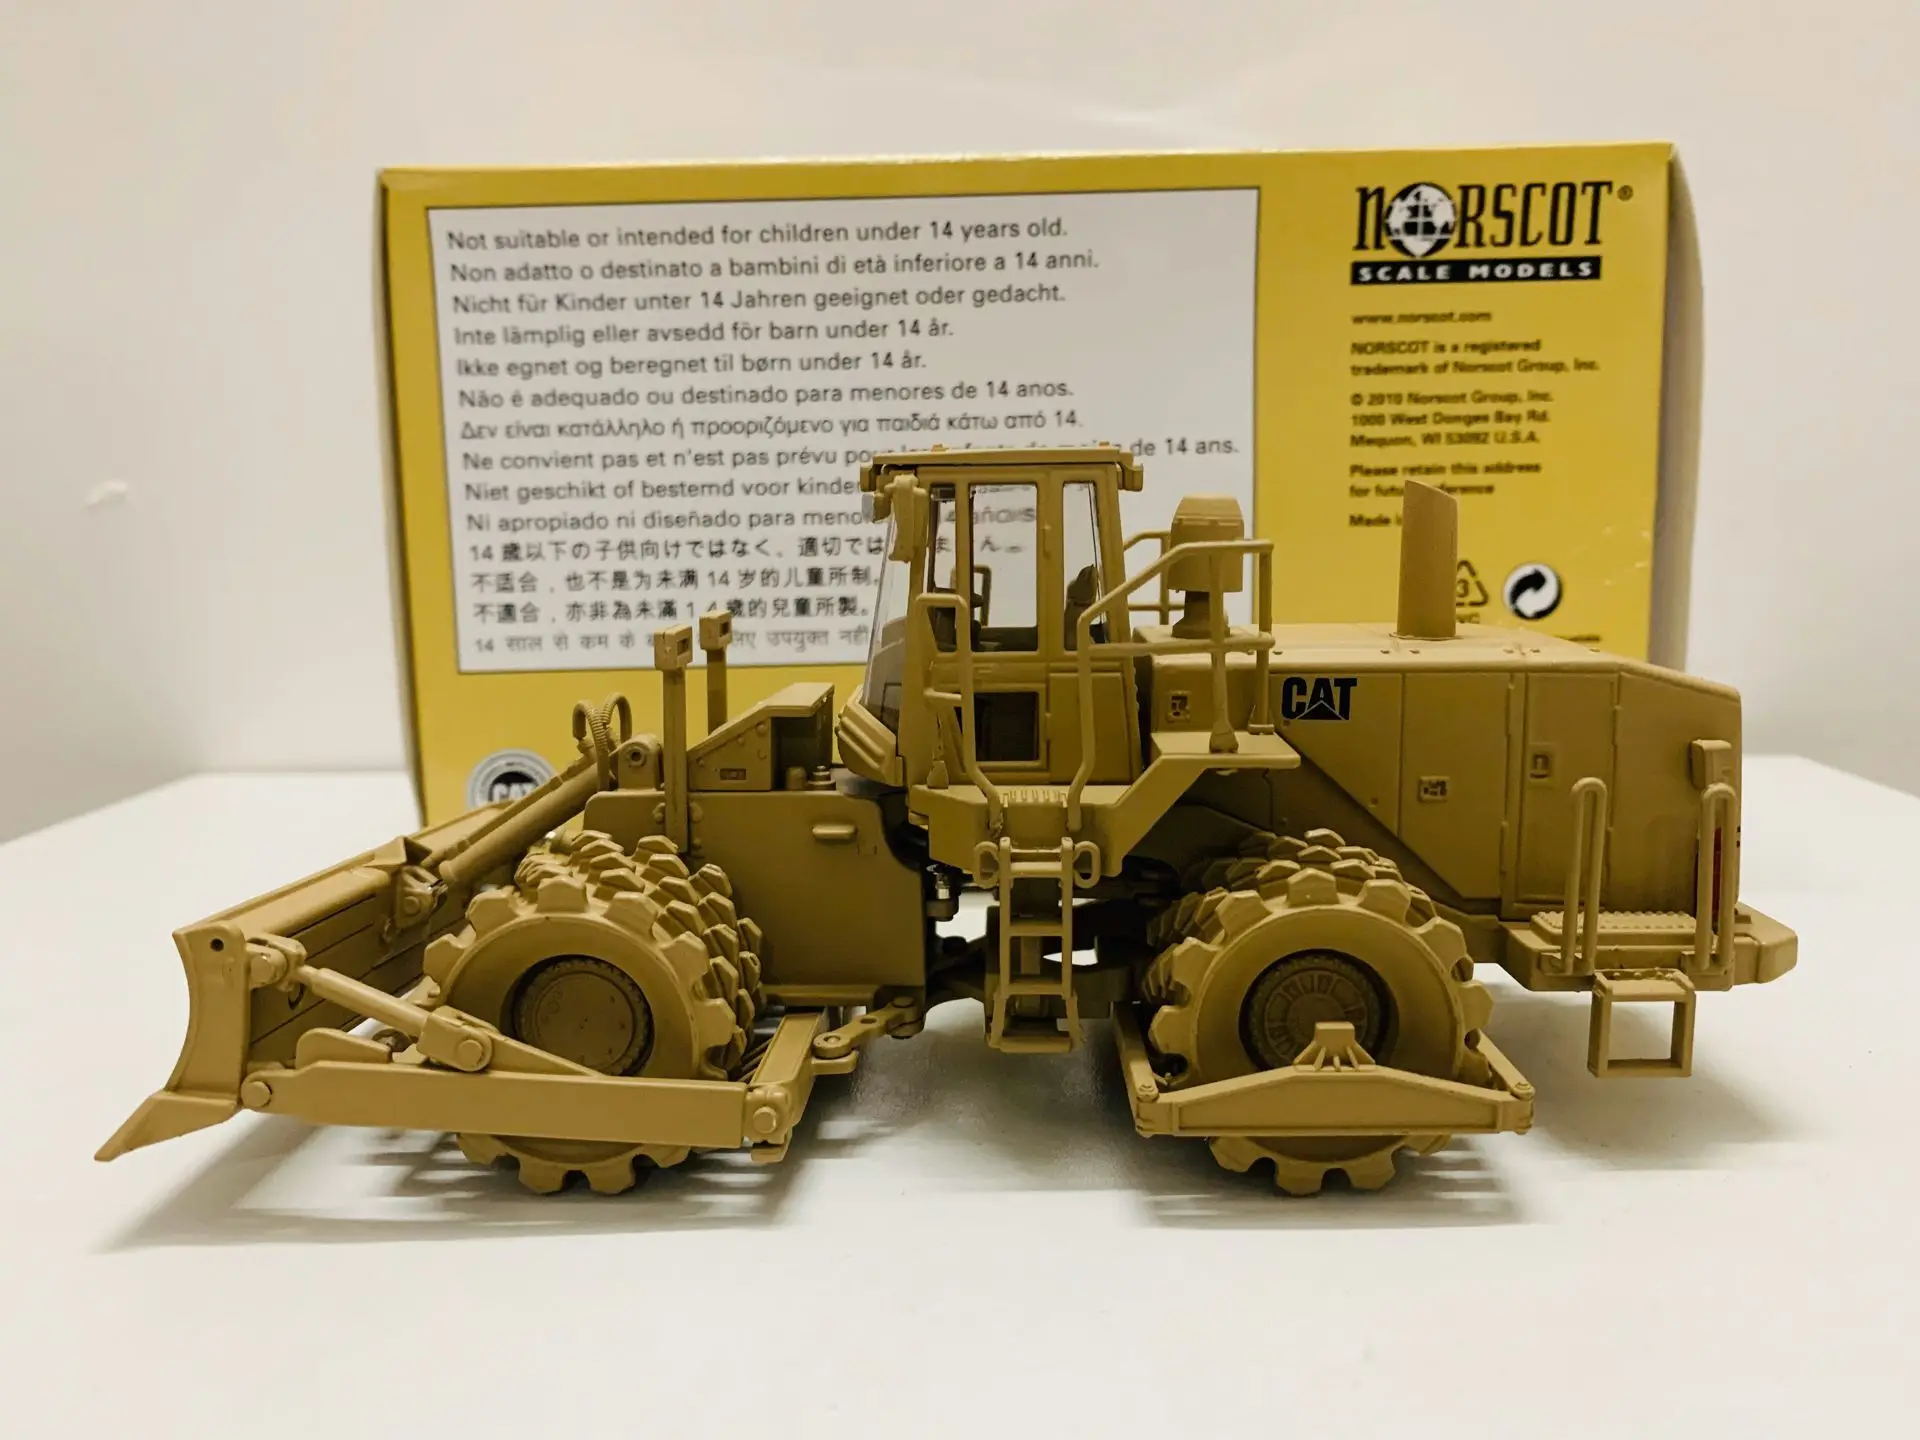 

Norscot Caterpillar Cat Military 815F Soil Compactor 1:50 Scale DieCast Model 55254 New in Box